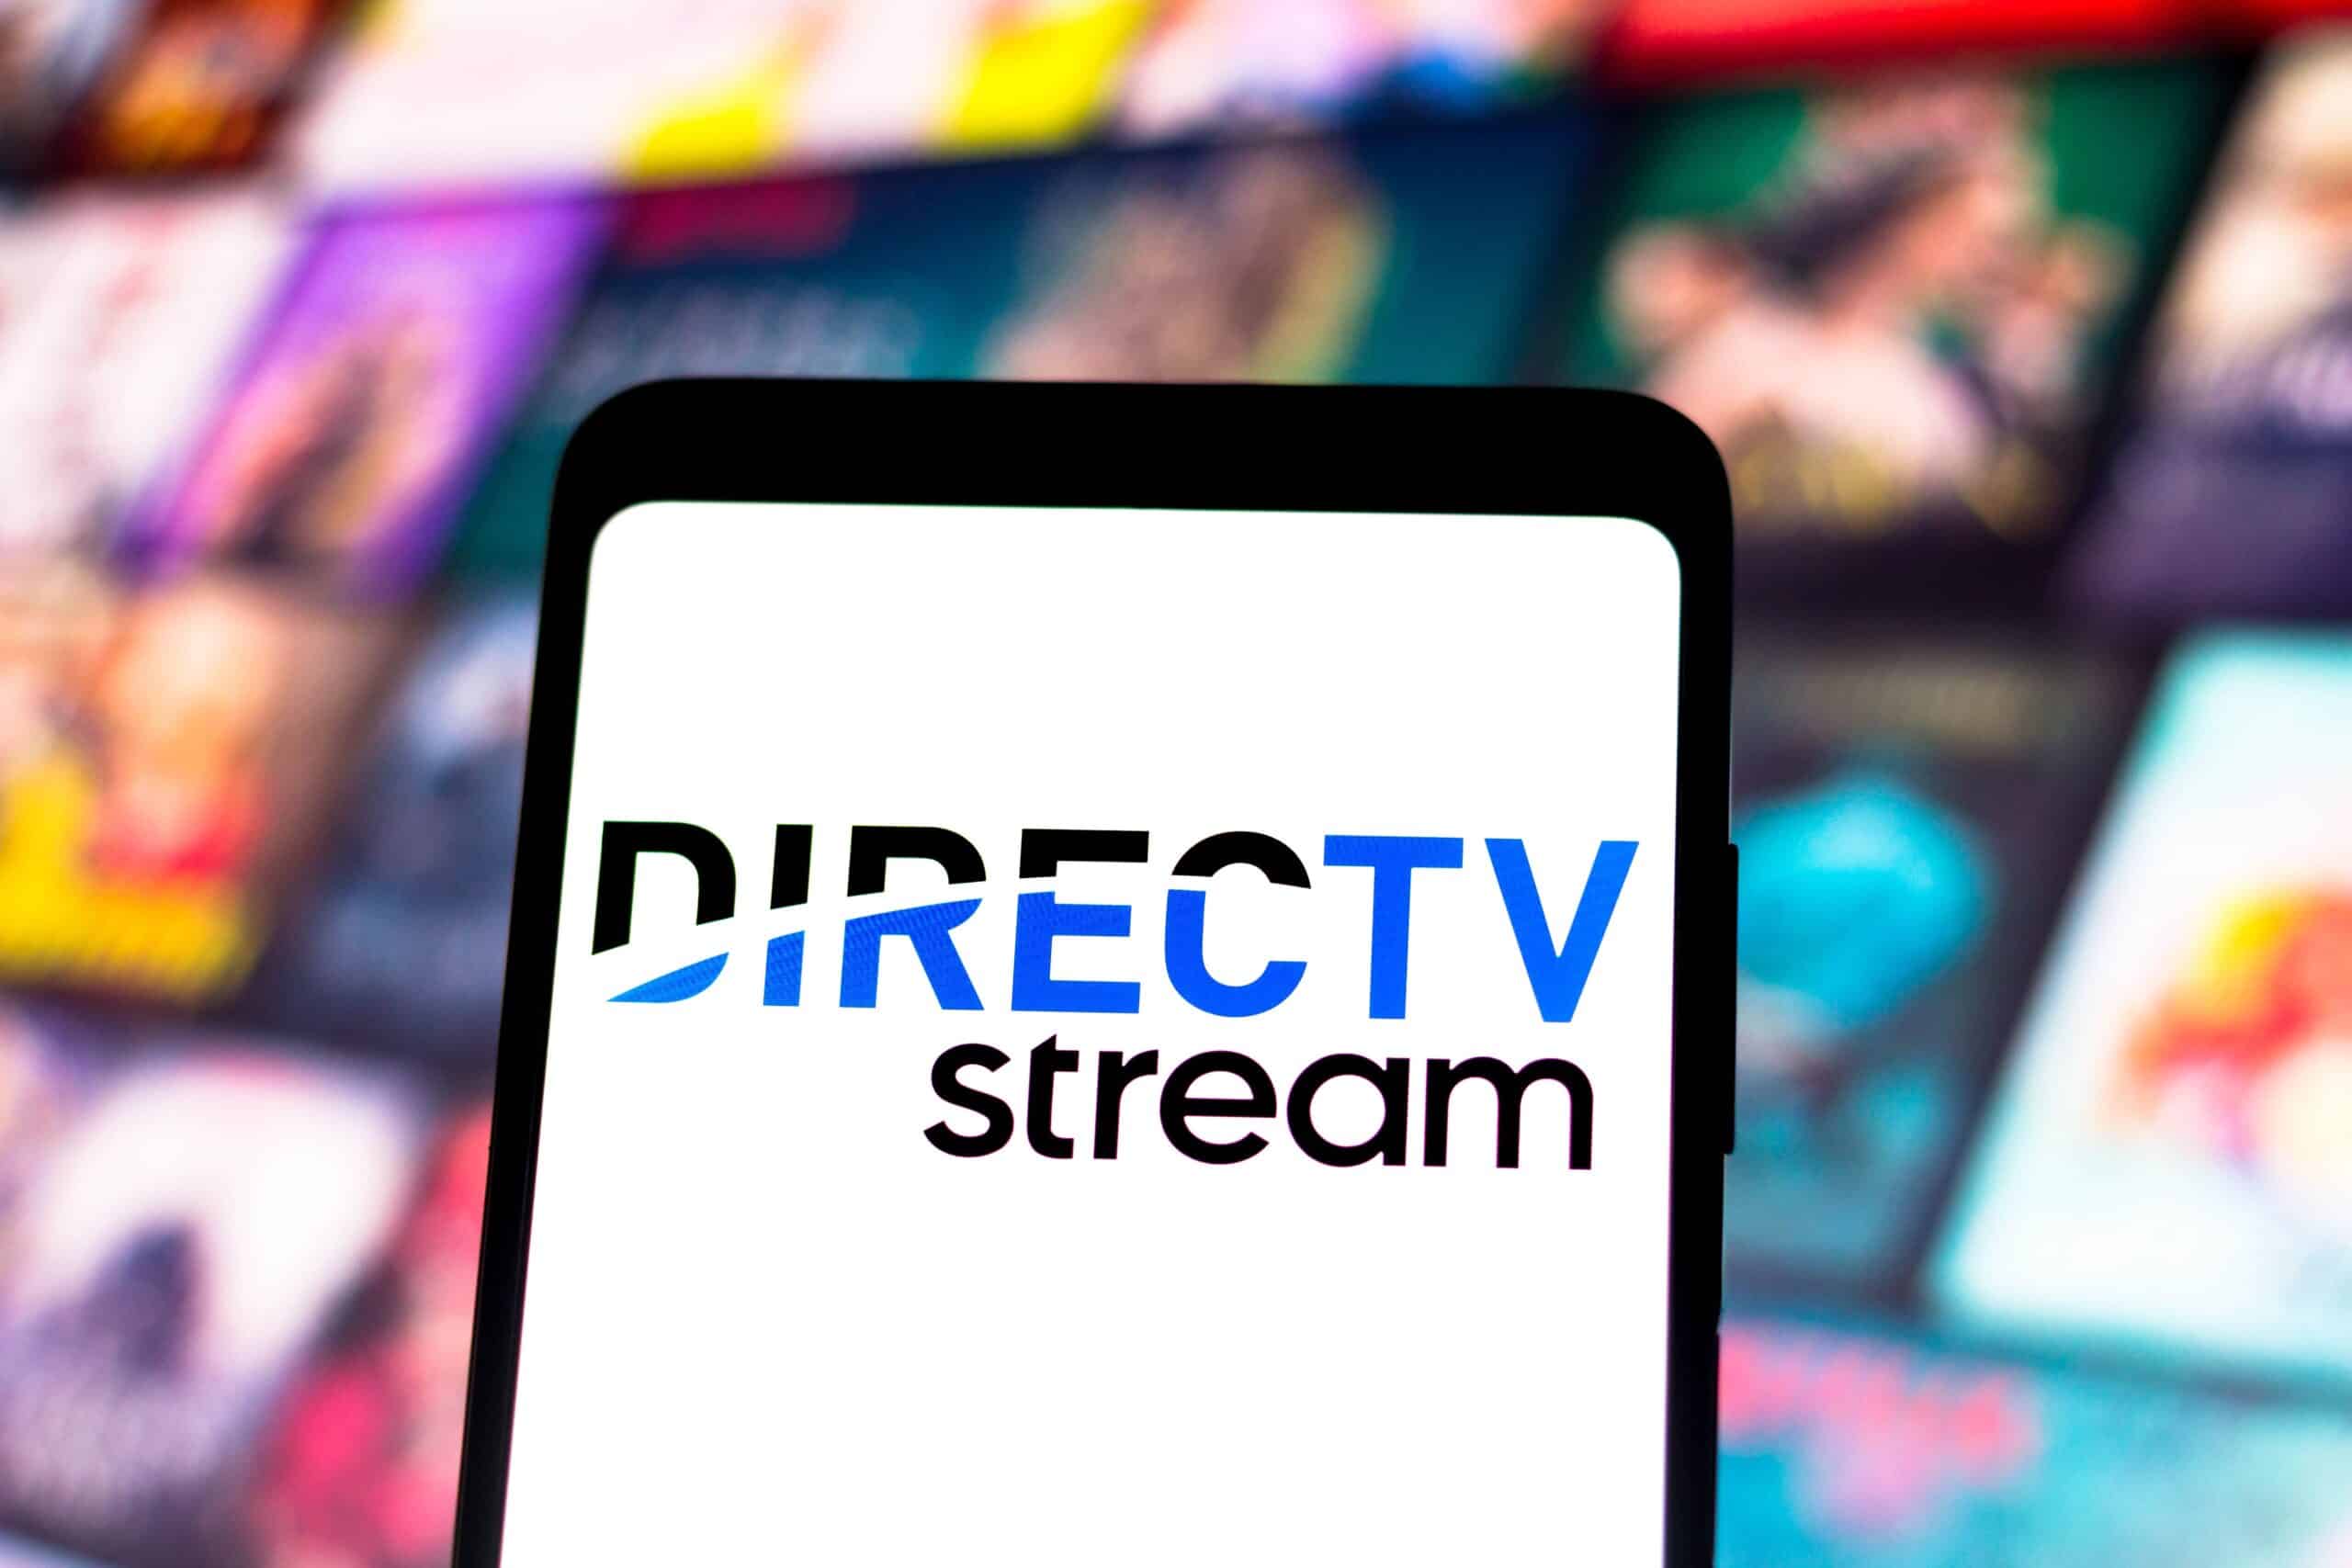 DIRECTV STREAM - Live Stream TV on Mobile & Streaming Devices